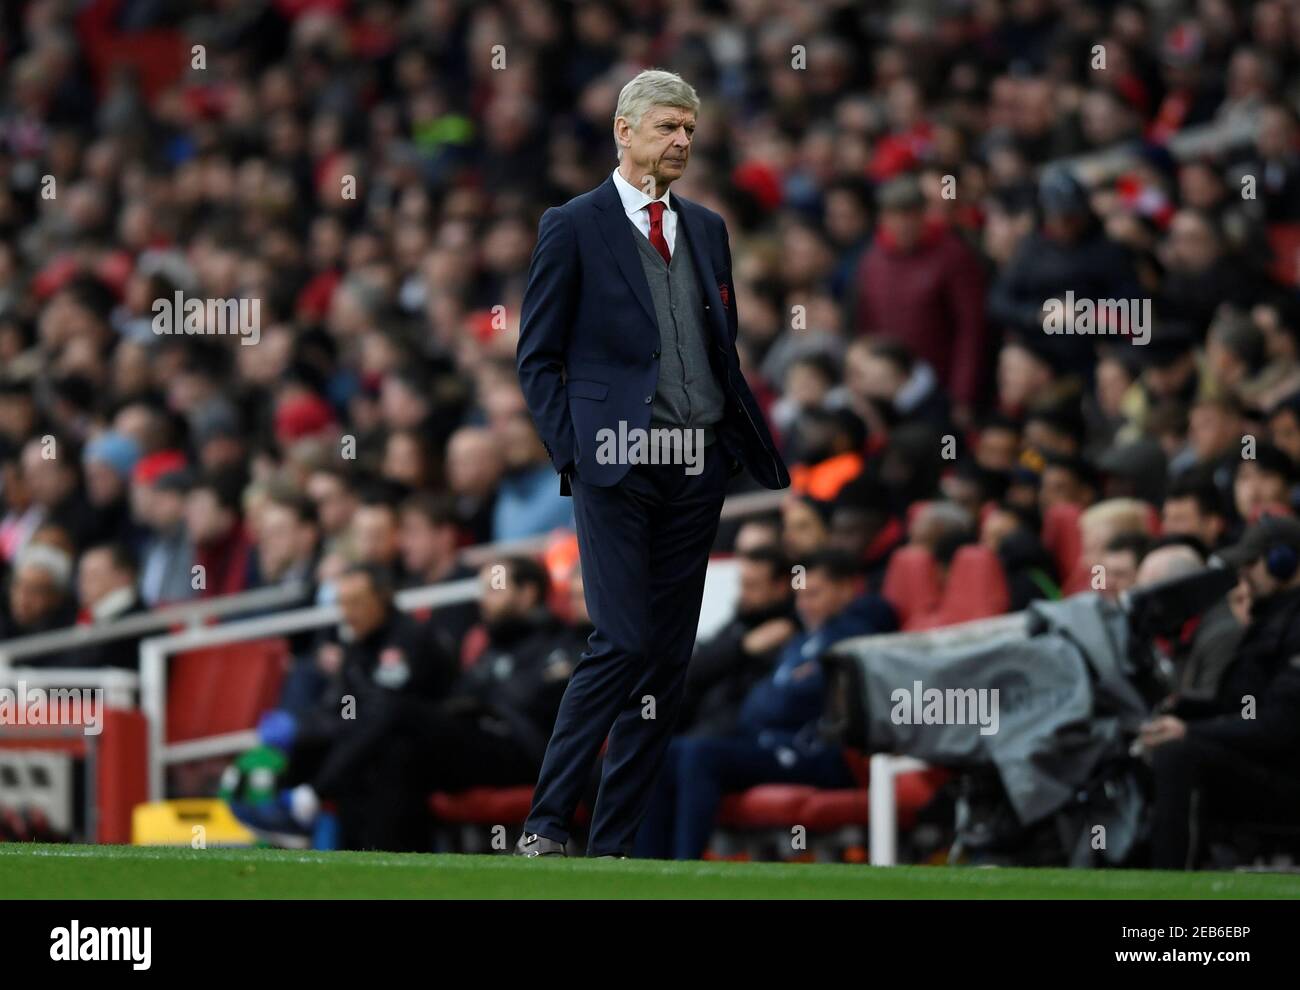 Soccer Football - Premier League - Arsenal vs Watford - Emirates Stadium, London, Britain - March 11, 2018   Arsenal manager Arsene Wenger      Action Images via Reuters/Tony O'Brien    EDITORIAL USE ONLY. No use with unauthorized audio, video, data, fixture lists, club/league logos or 'live' services. Online in-match use limited to 75 images, no video emulation. No use in betting, games or single club/league/player publications.  Please contact your account representative for further details. Stock Photo